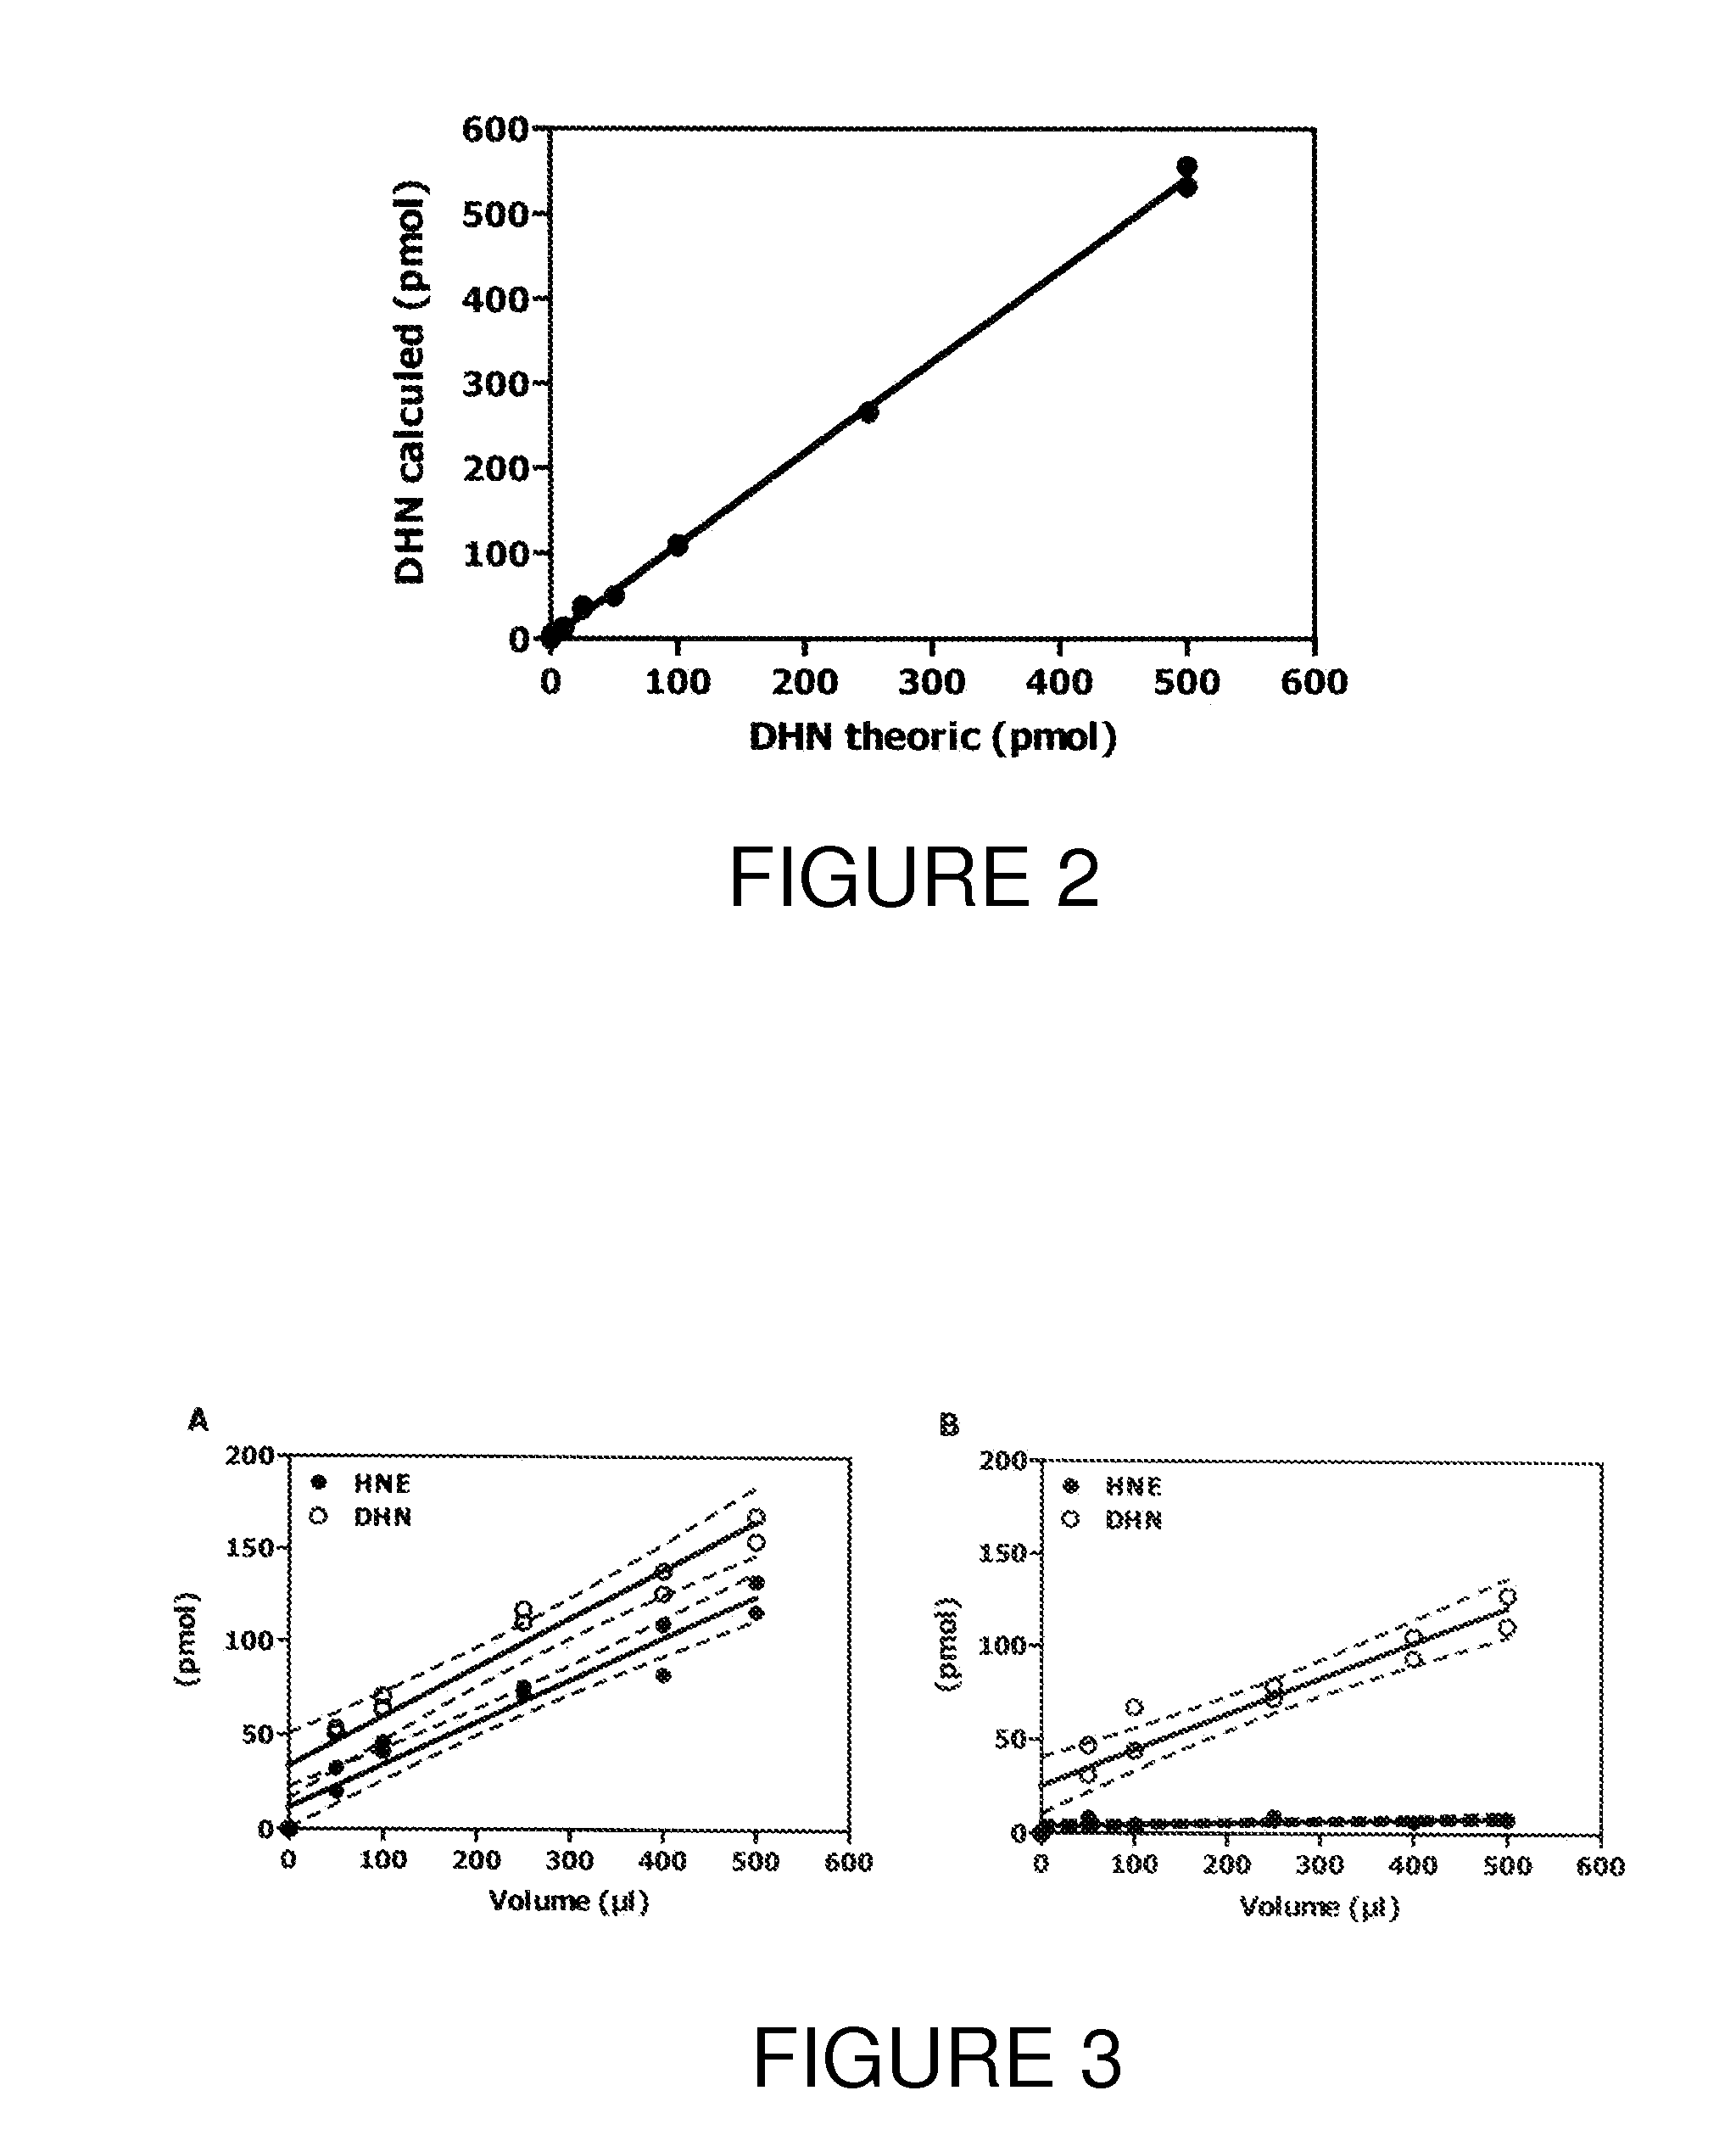 Method for quantifying oxidative stress caused by different biological pathways